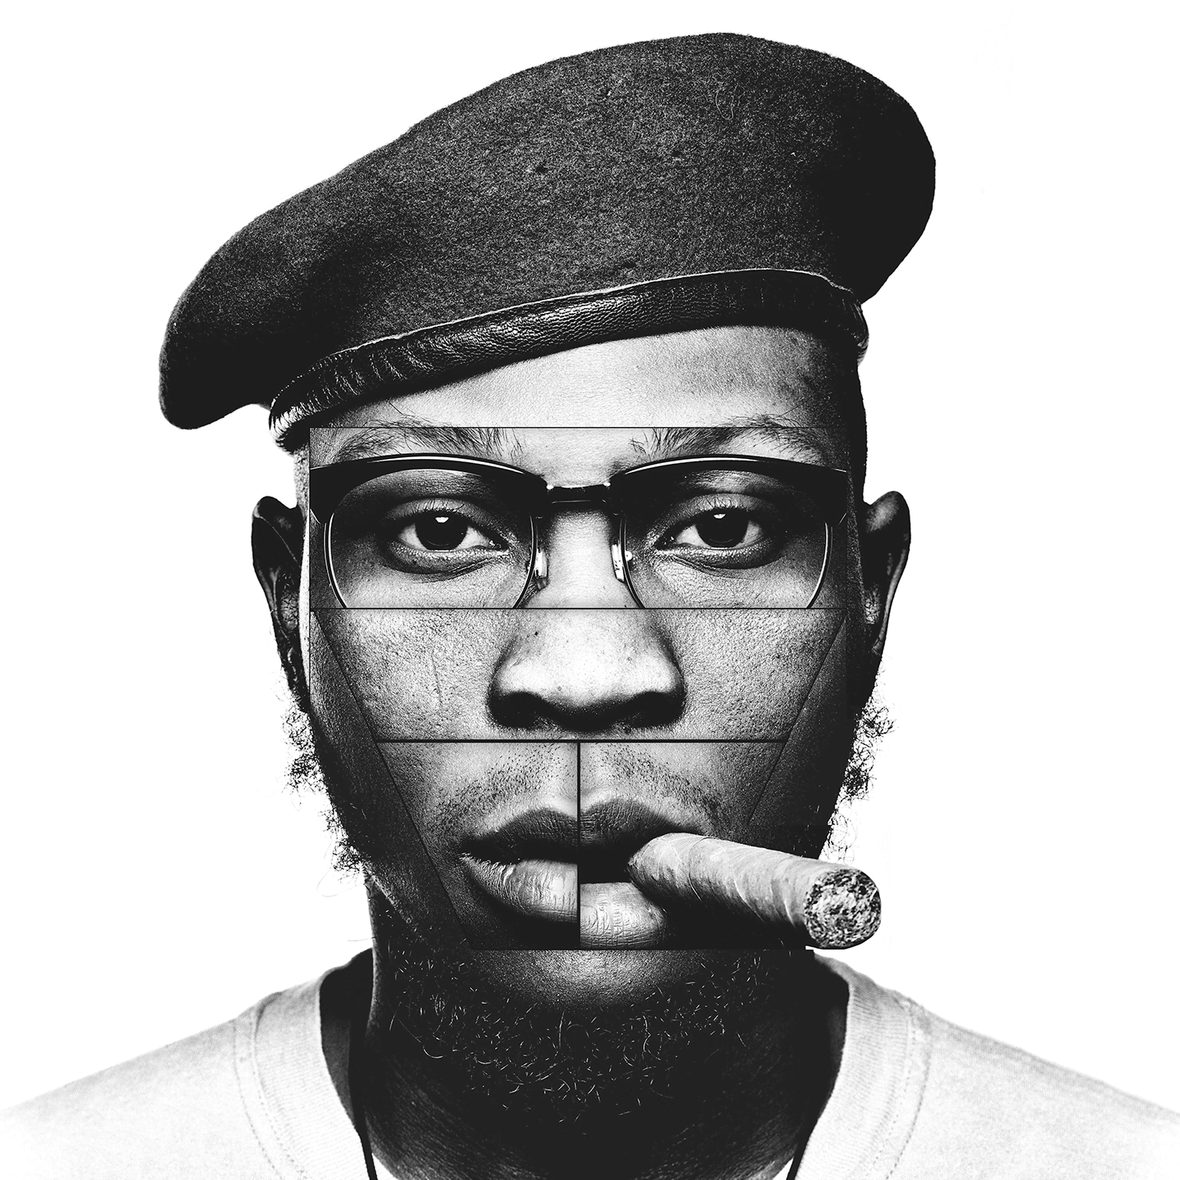 SEUN KUTI & EGYPT 80 release two new songs and Amidst international tour via Platform Media Group for use by 360 Magazine